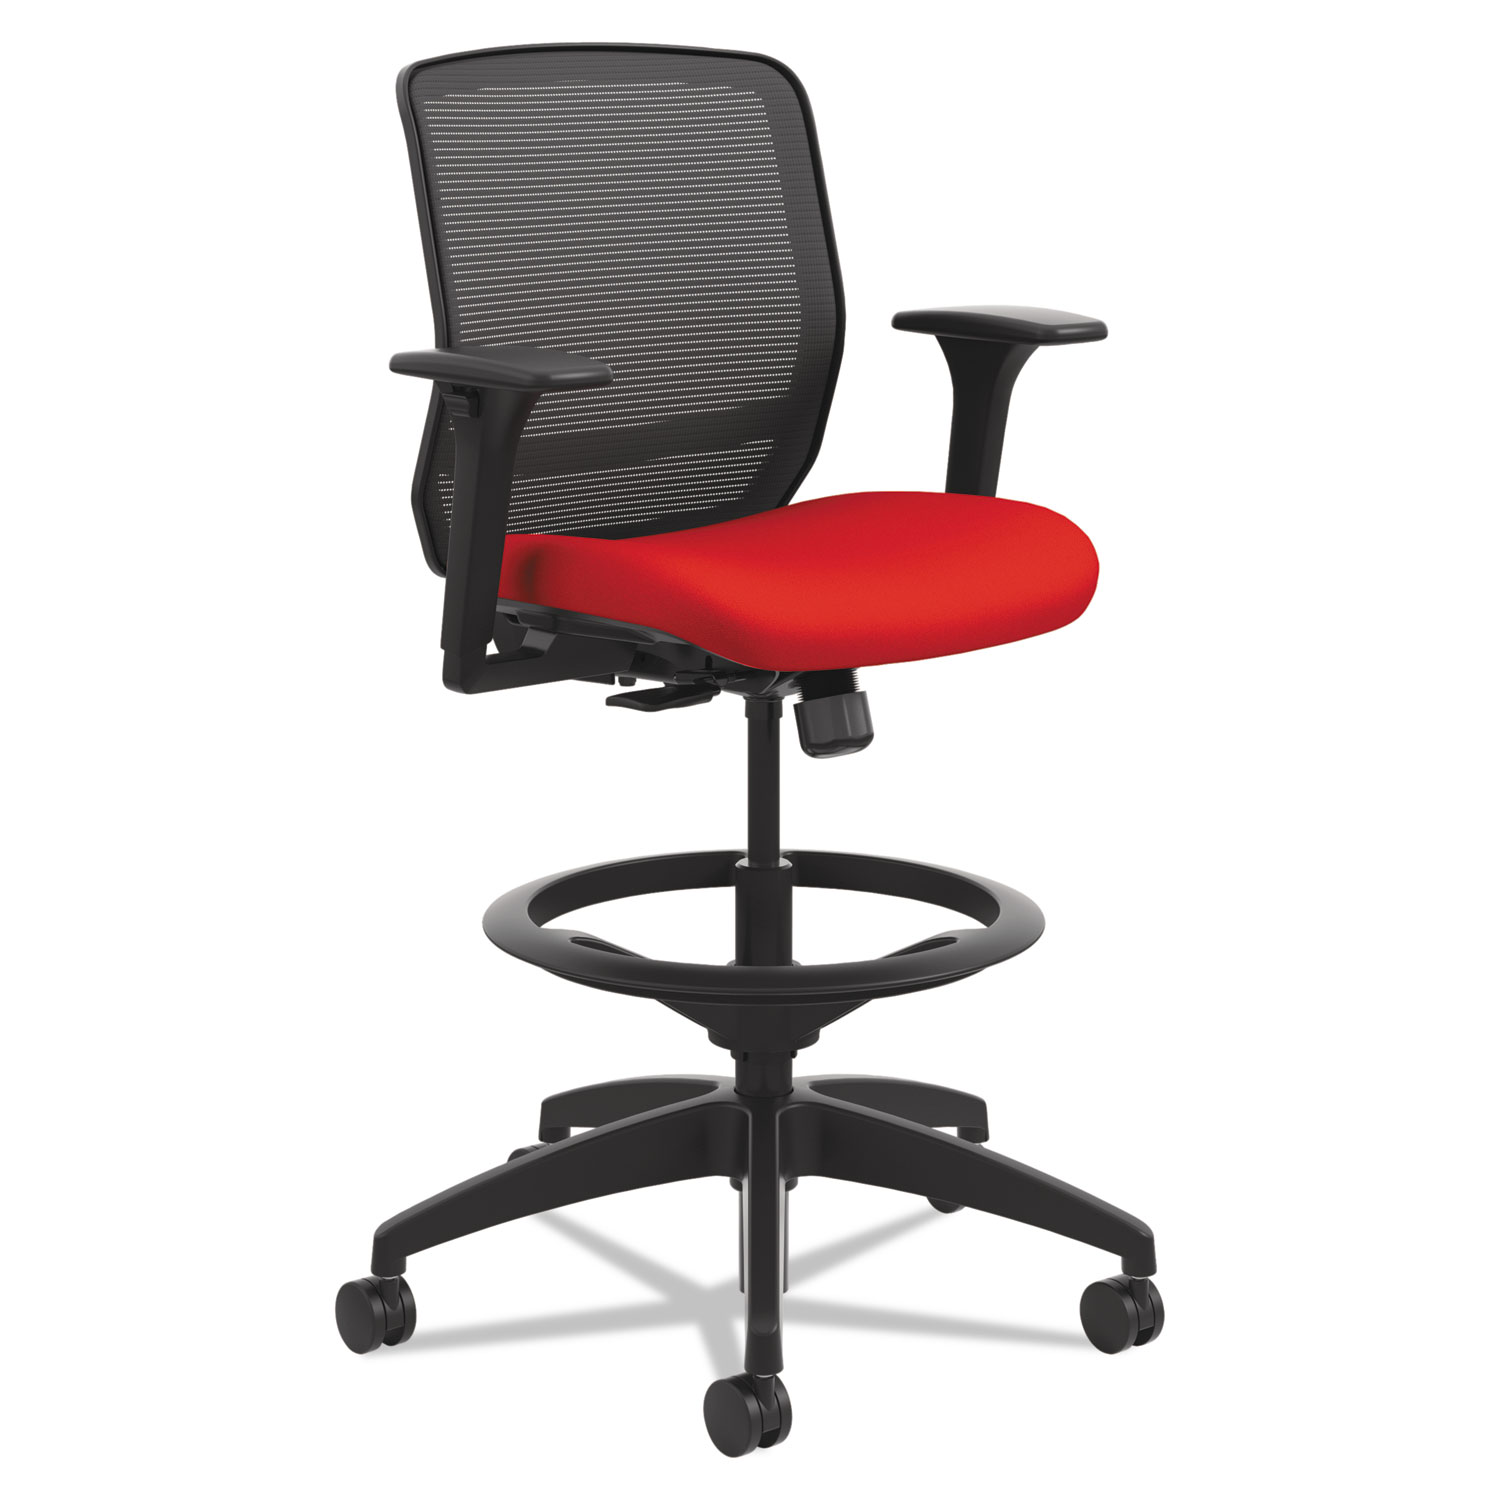  HON HQTSM.Y0.A.H.IM.CU67.SB Quotient Series Mesh Mid-Back Task Stool, 33 Seat Height, Supports up to 300 lbs., Ruby Seat/Black Back, Black Base (HONQTSMY1ACU67) 